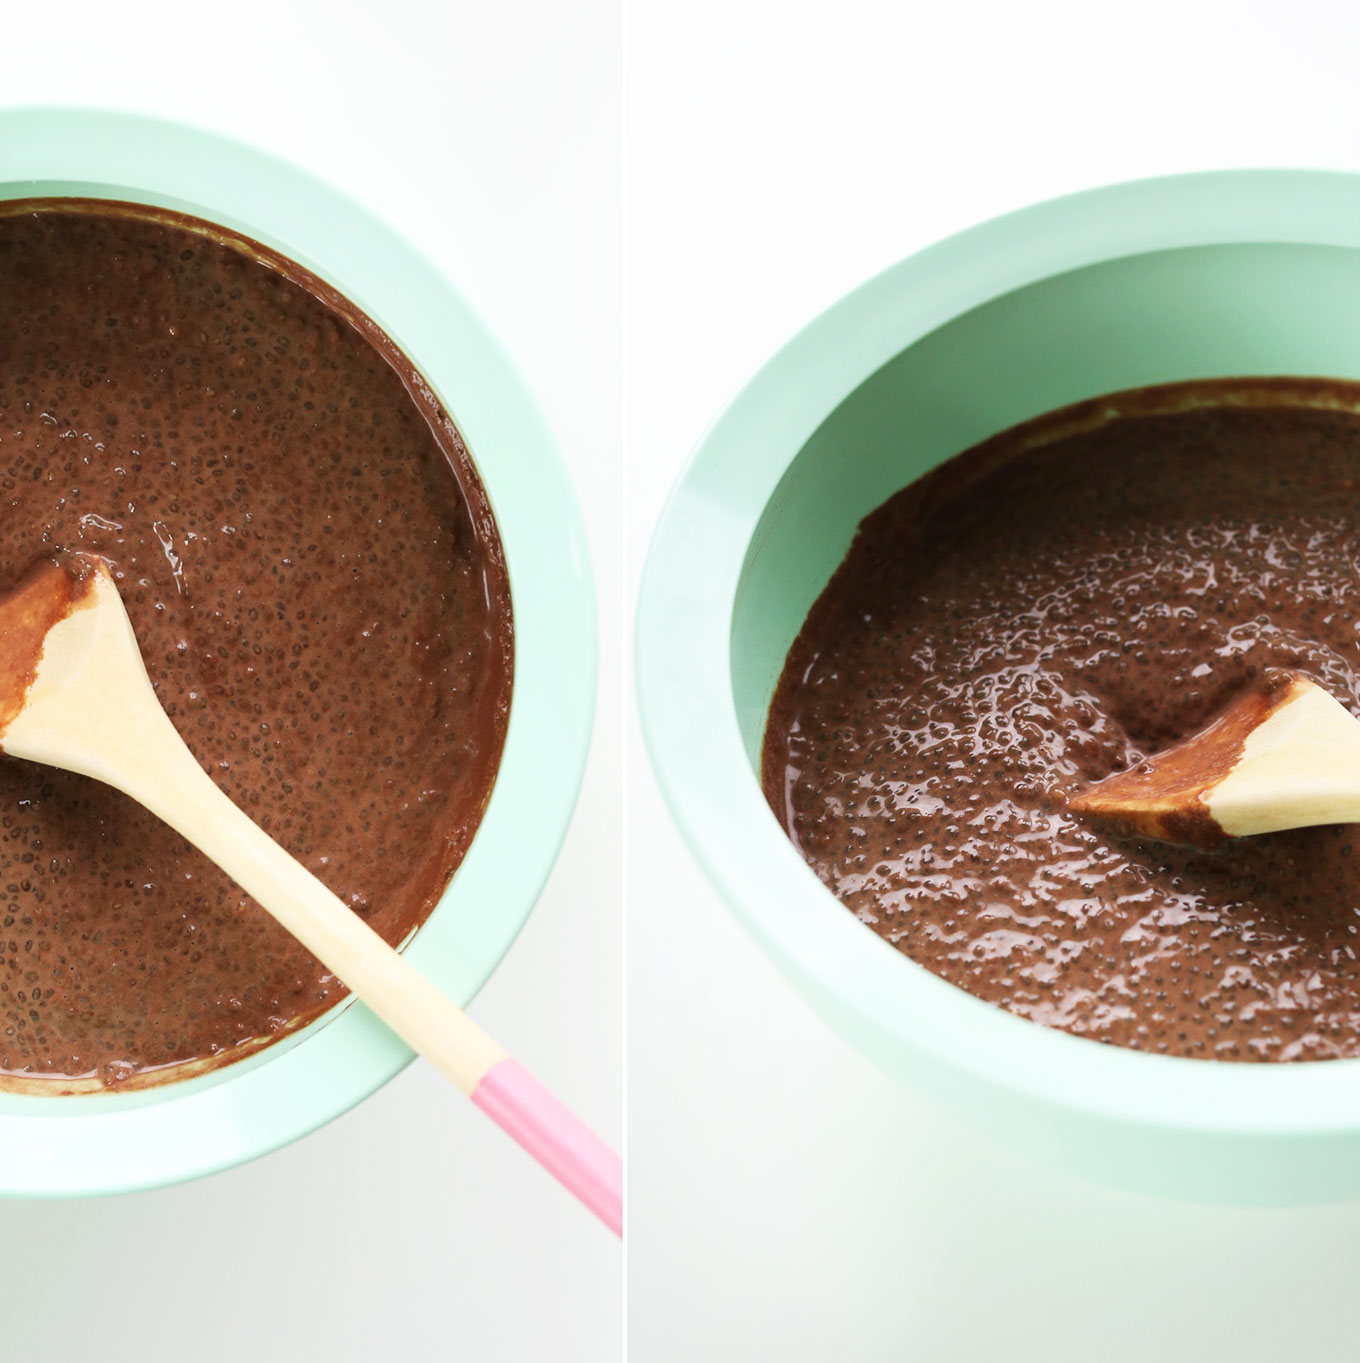 Big bowl of Chocolate Chia Seed Pudding for a gluten-free vegan snack